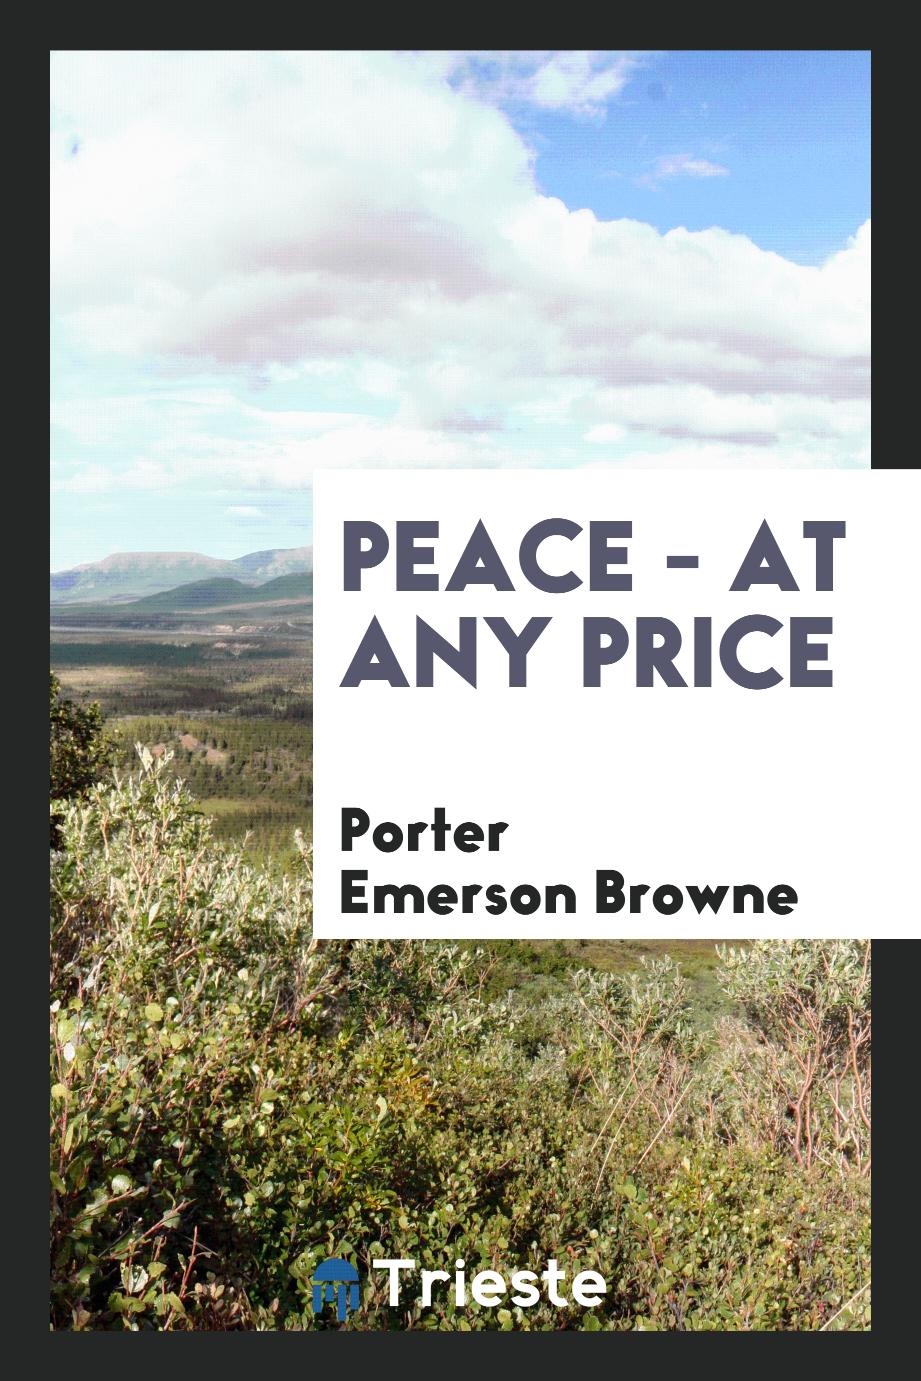 Peace - at any price